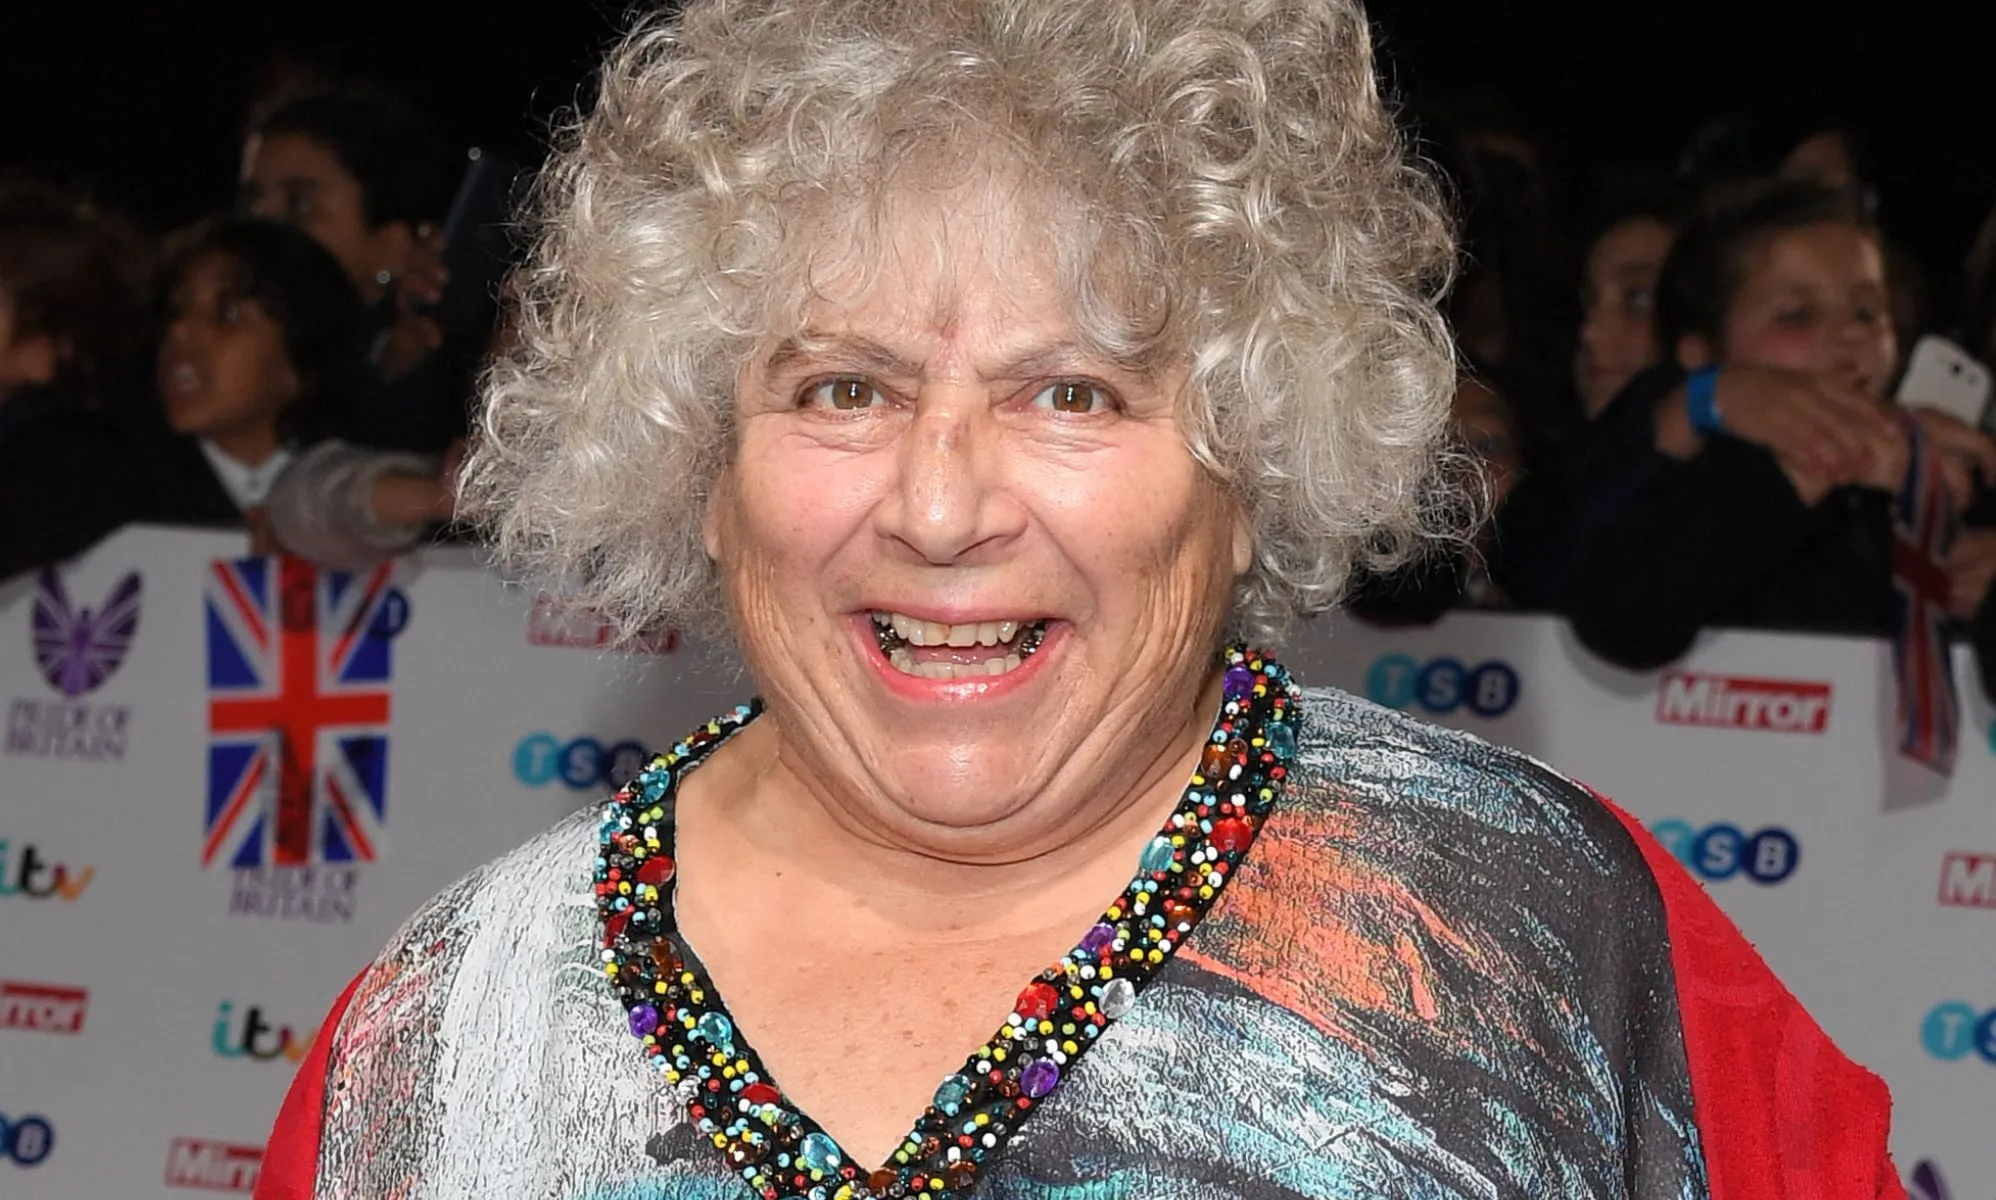 Miriam Margolyes says she ‘worries about’ adult Harry Potter fans: ‘They should be over it by now’